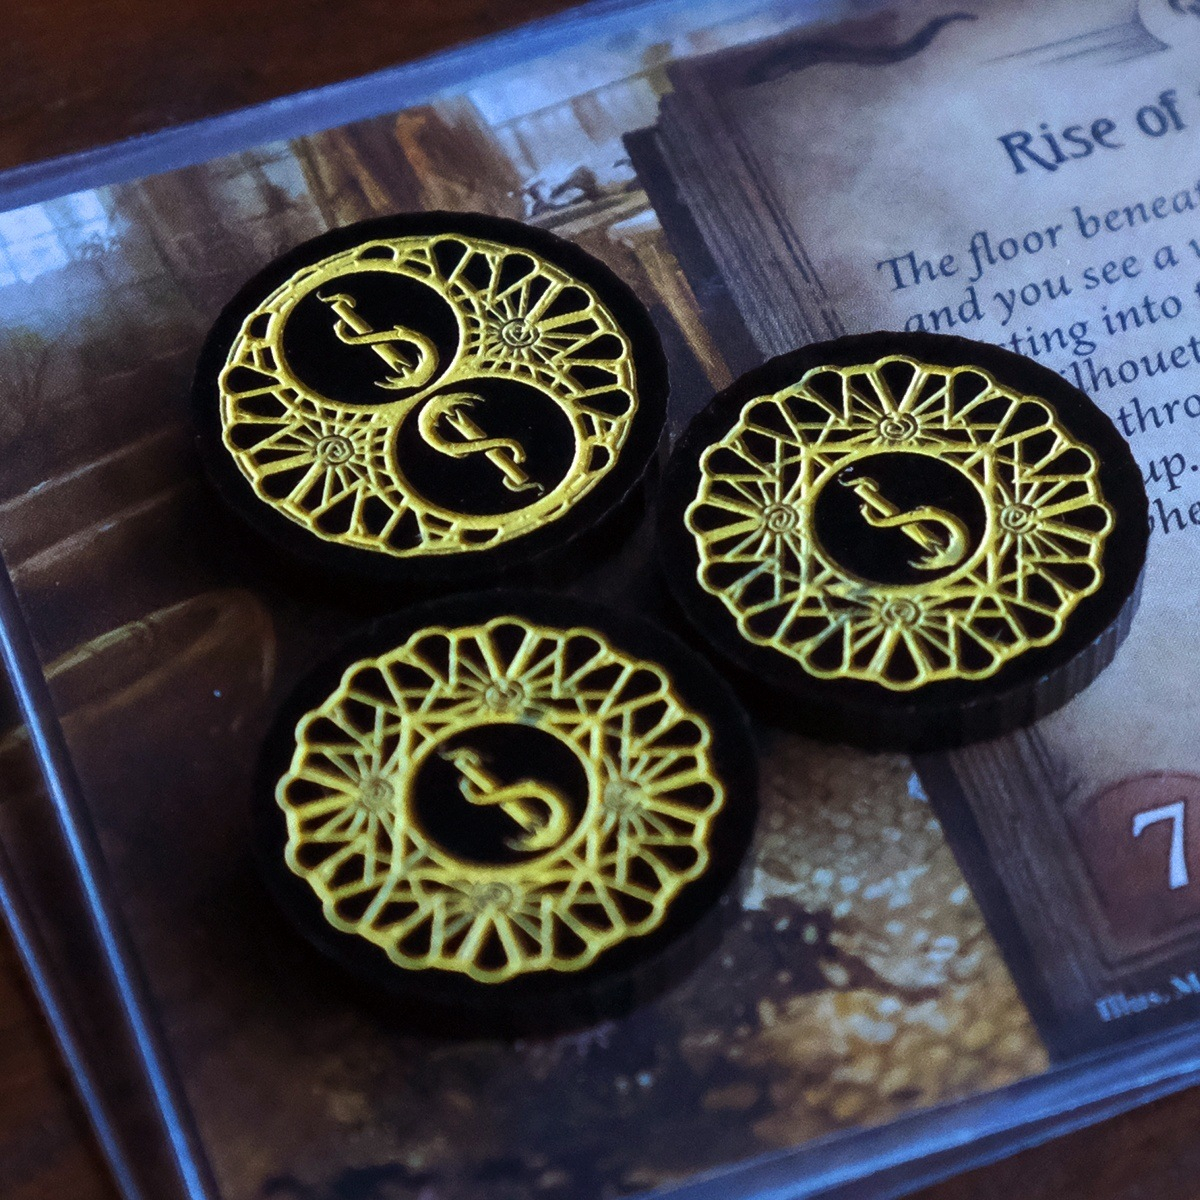 One two-value and two one-value Carcosa Limited Edition Doom tokens on the Arkham Horror LCG card, Rise of the Ghouls